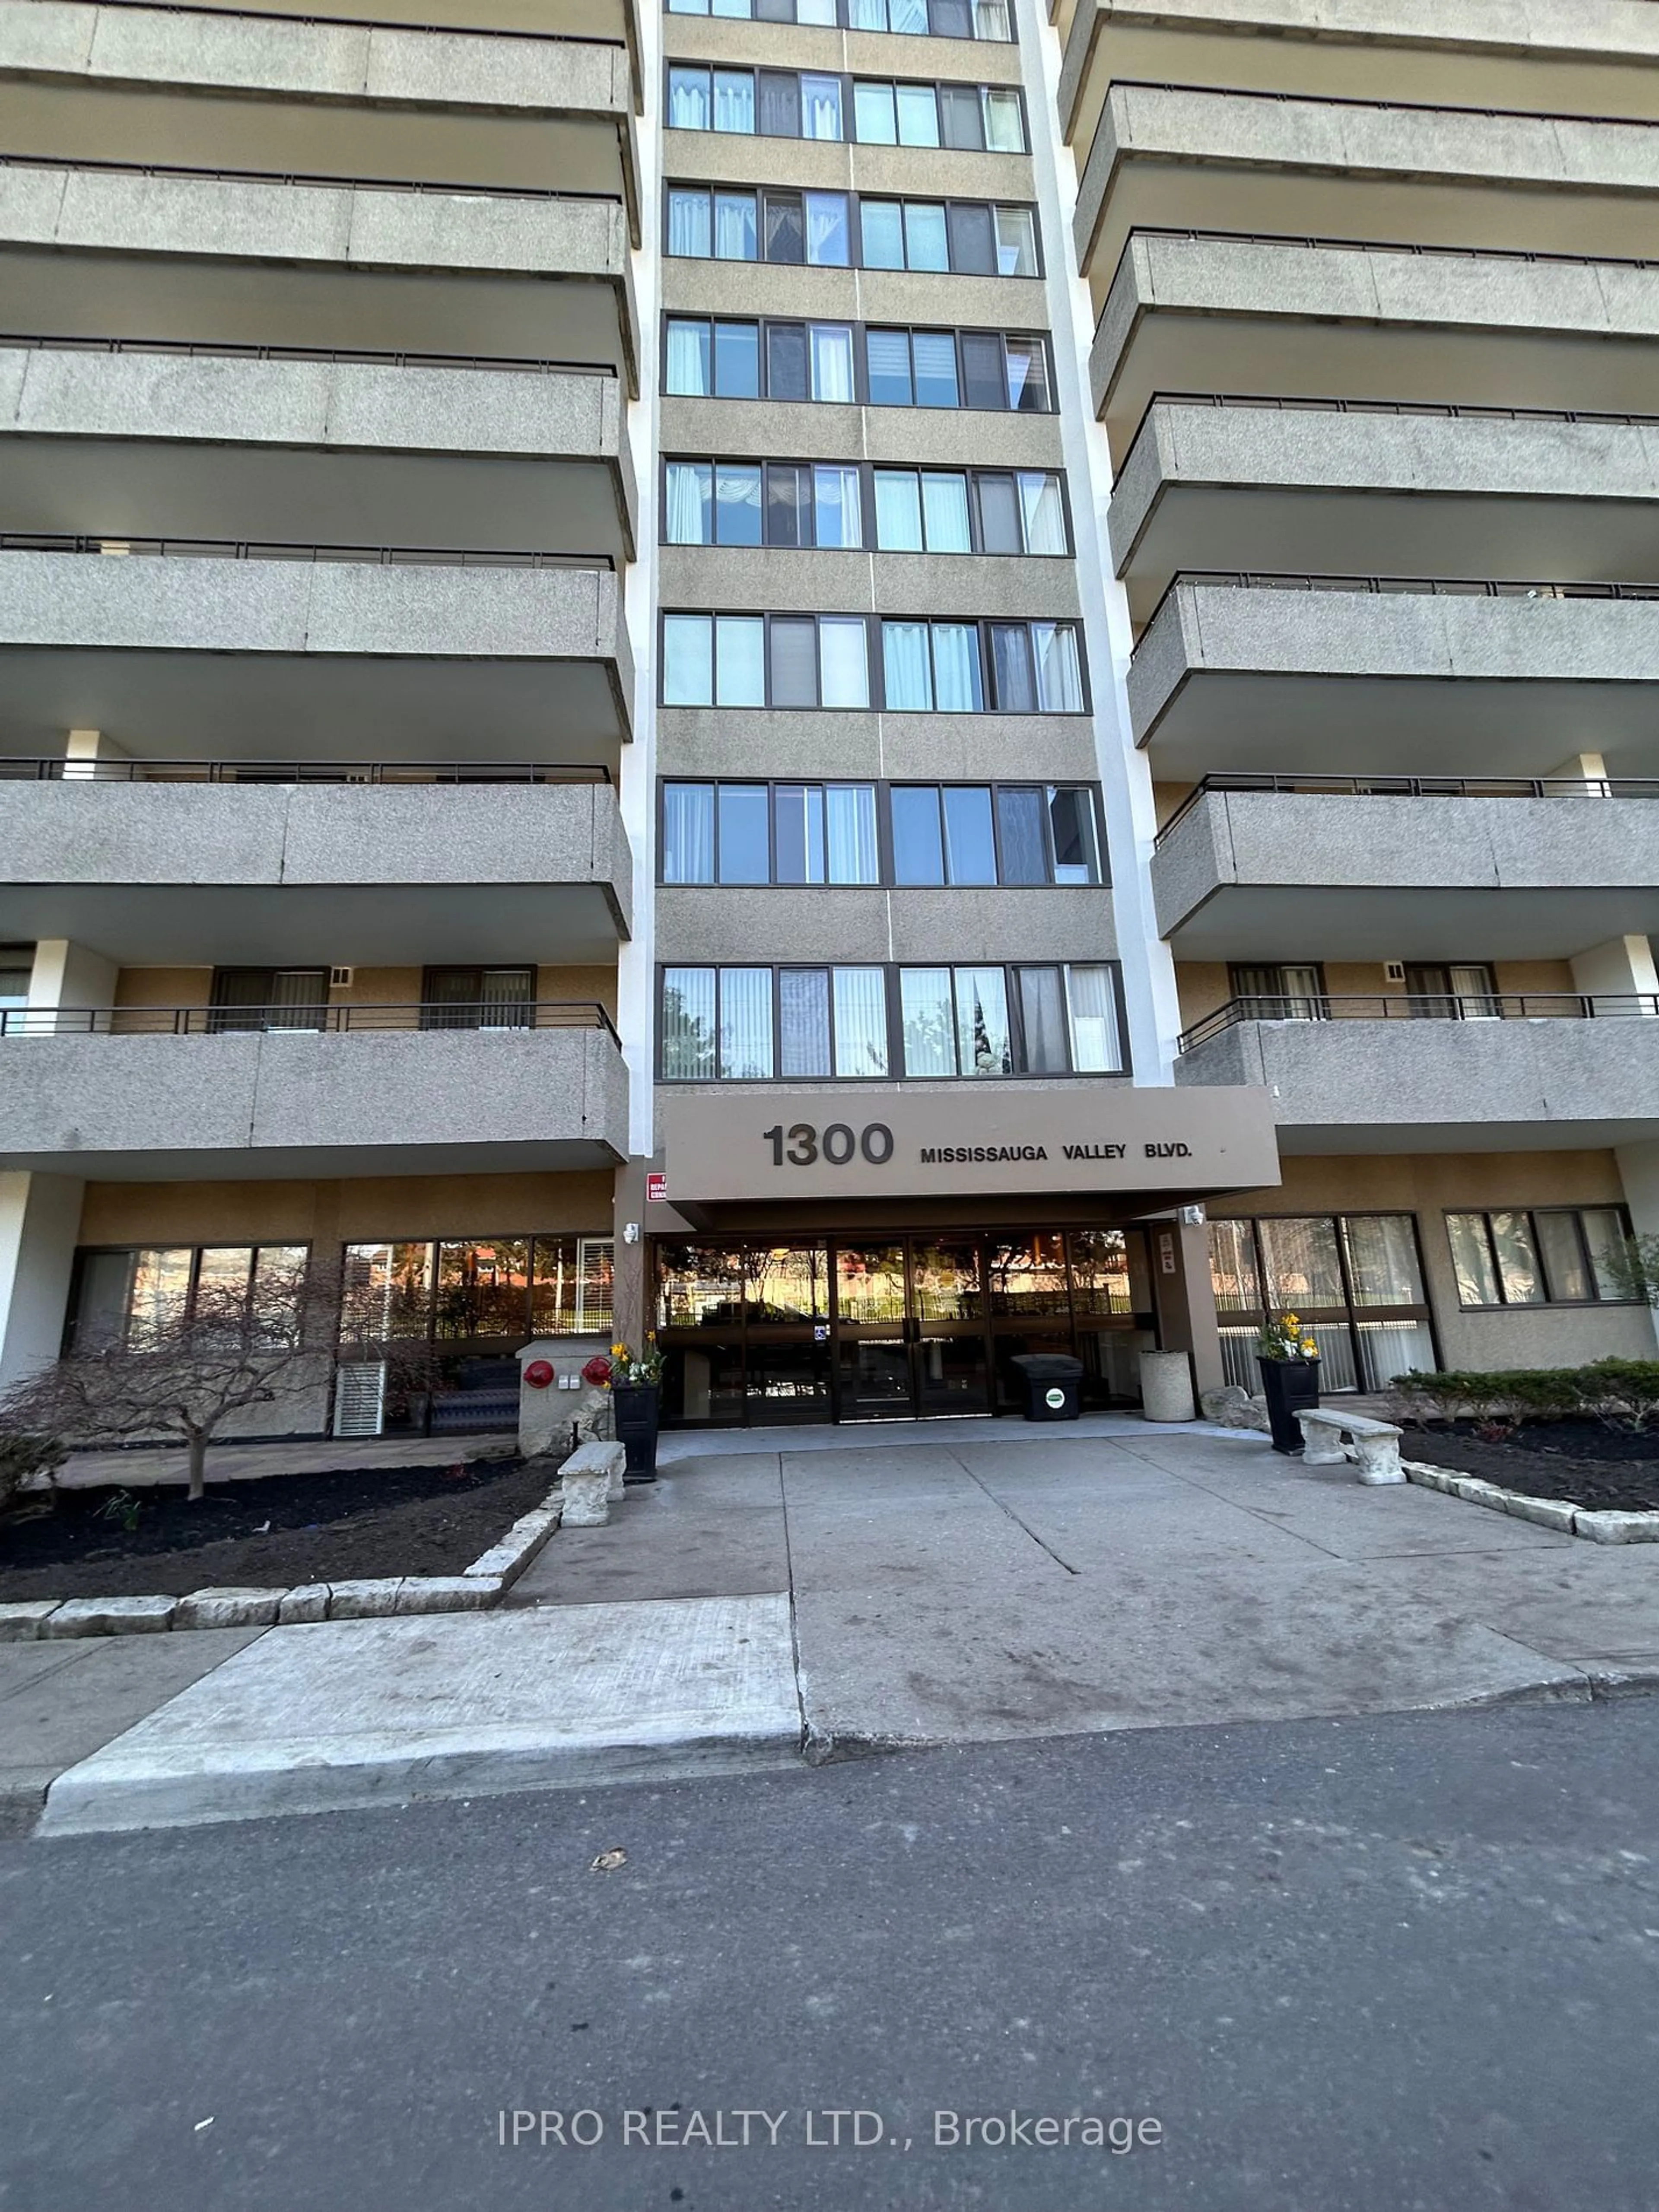 Outside view for 1300 Mississauga Valley Blvd #1405, Mississauga Ontario L5A 3S9